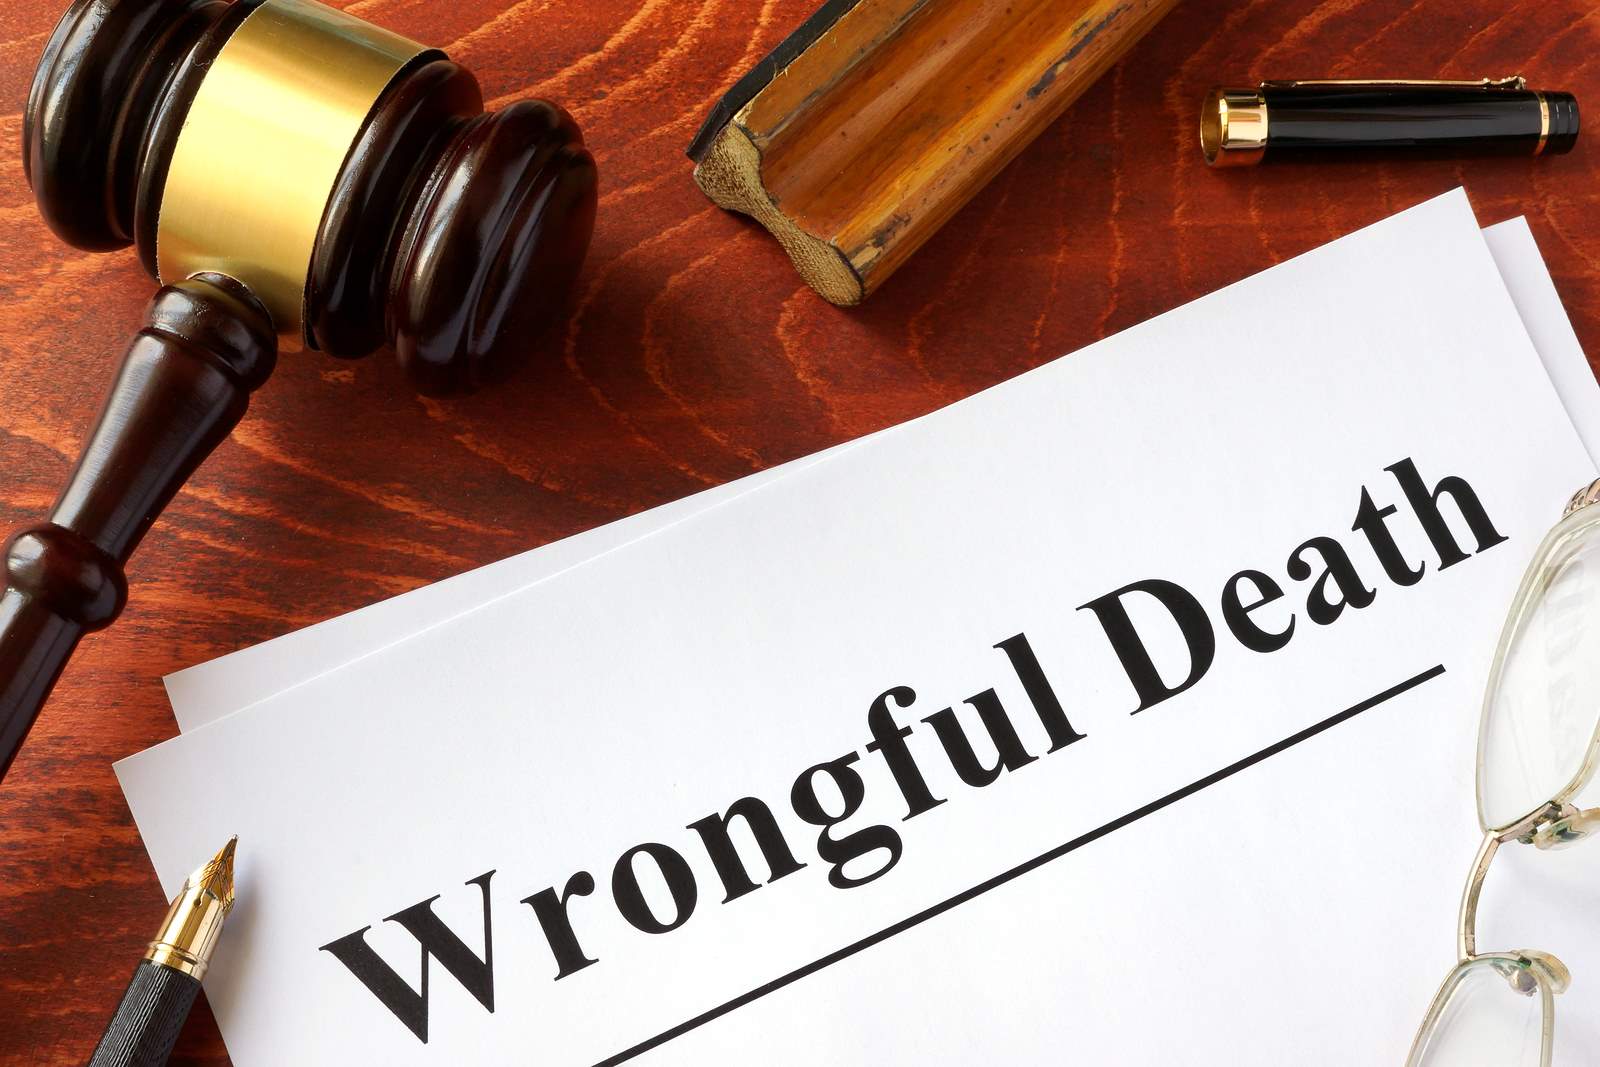 Wrongful Death Lawyer Miami: The Top Reasons You Should Hire One and Other Resourceful Information